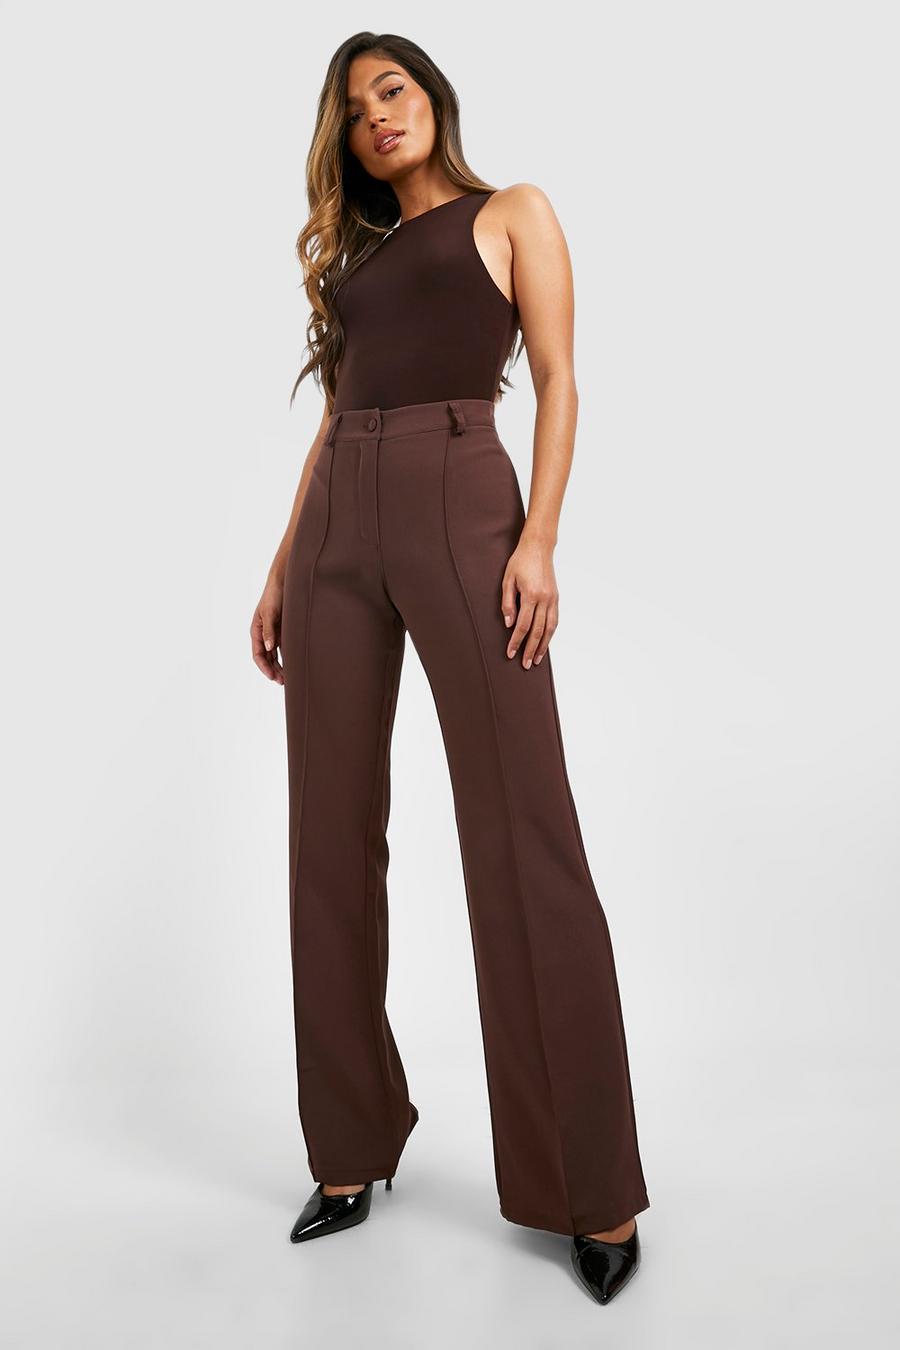 Chocolate Fit & Flare Dress Pants